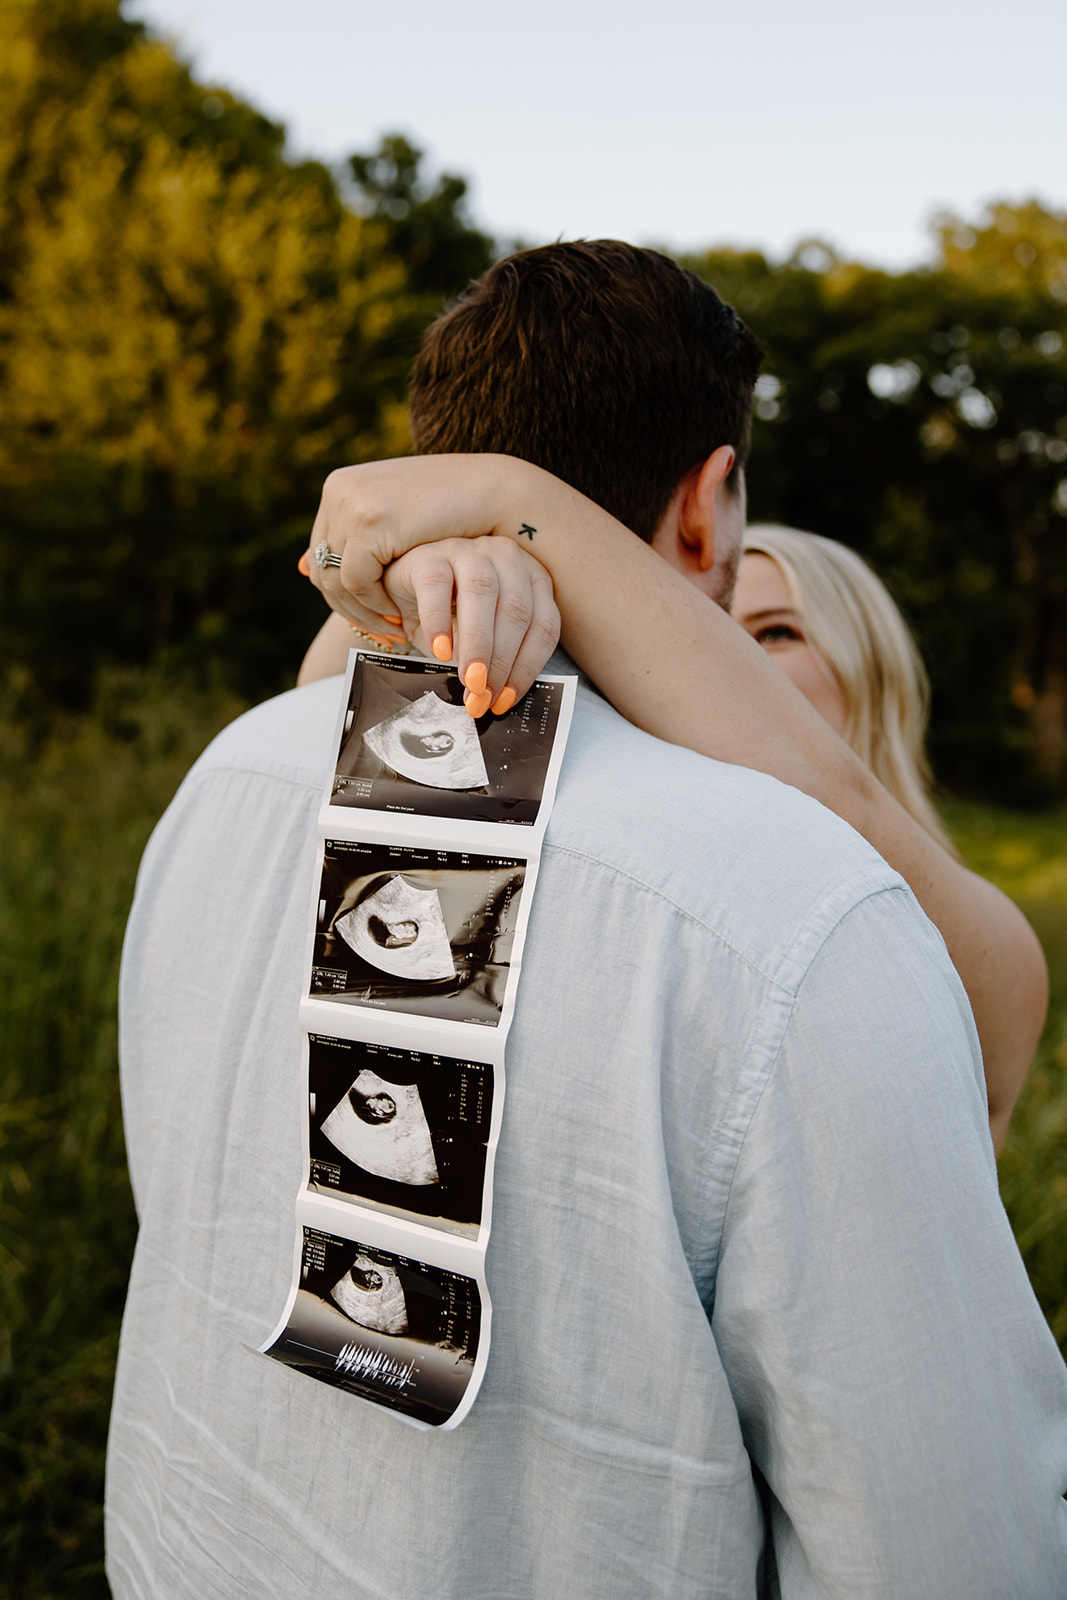 Pregnancy announcement photoshoot locations in Raleigh, North Carolina